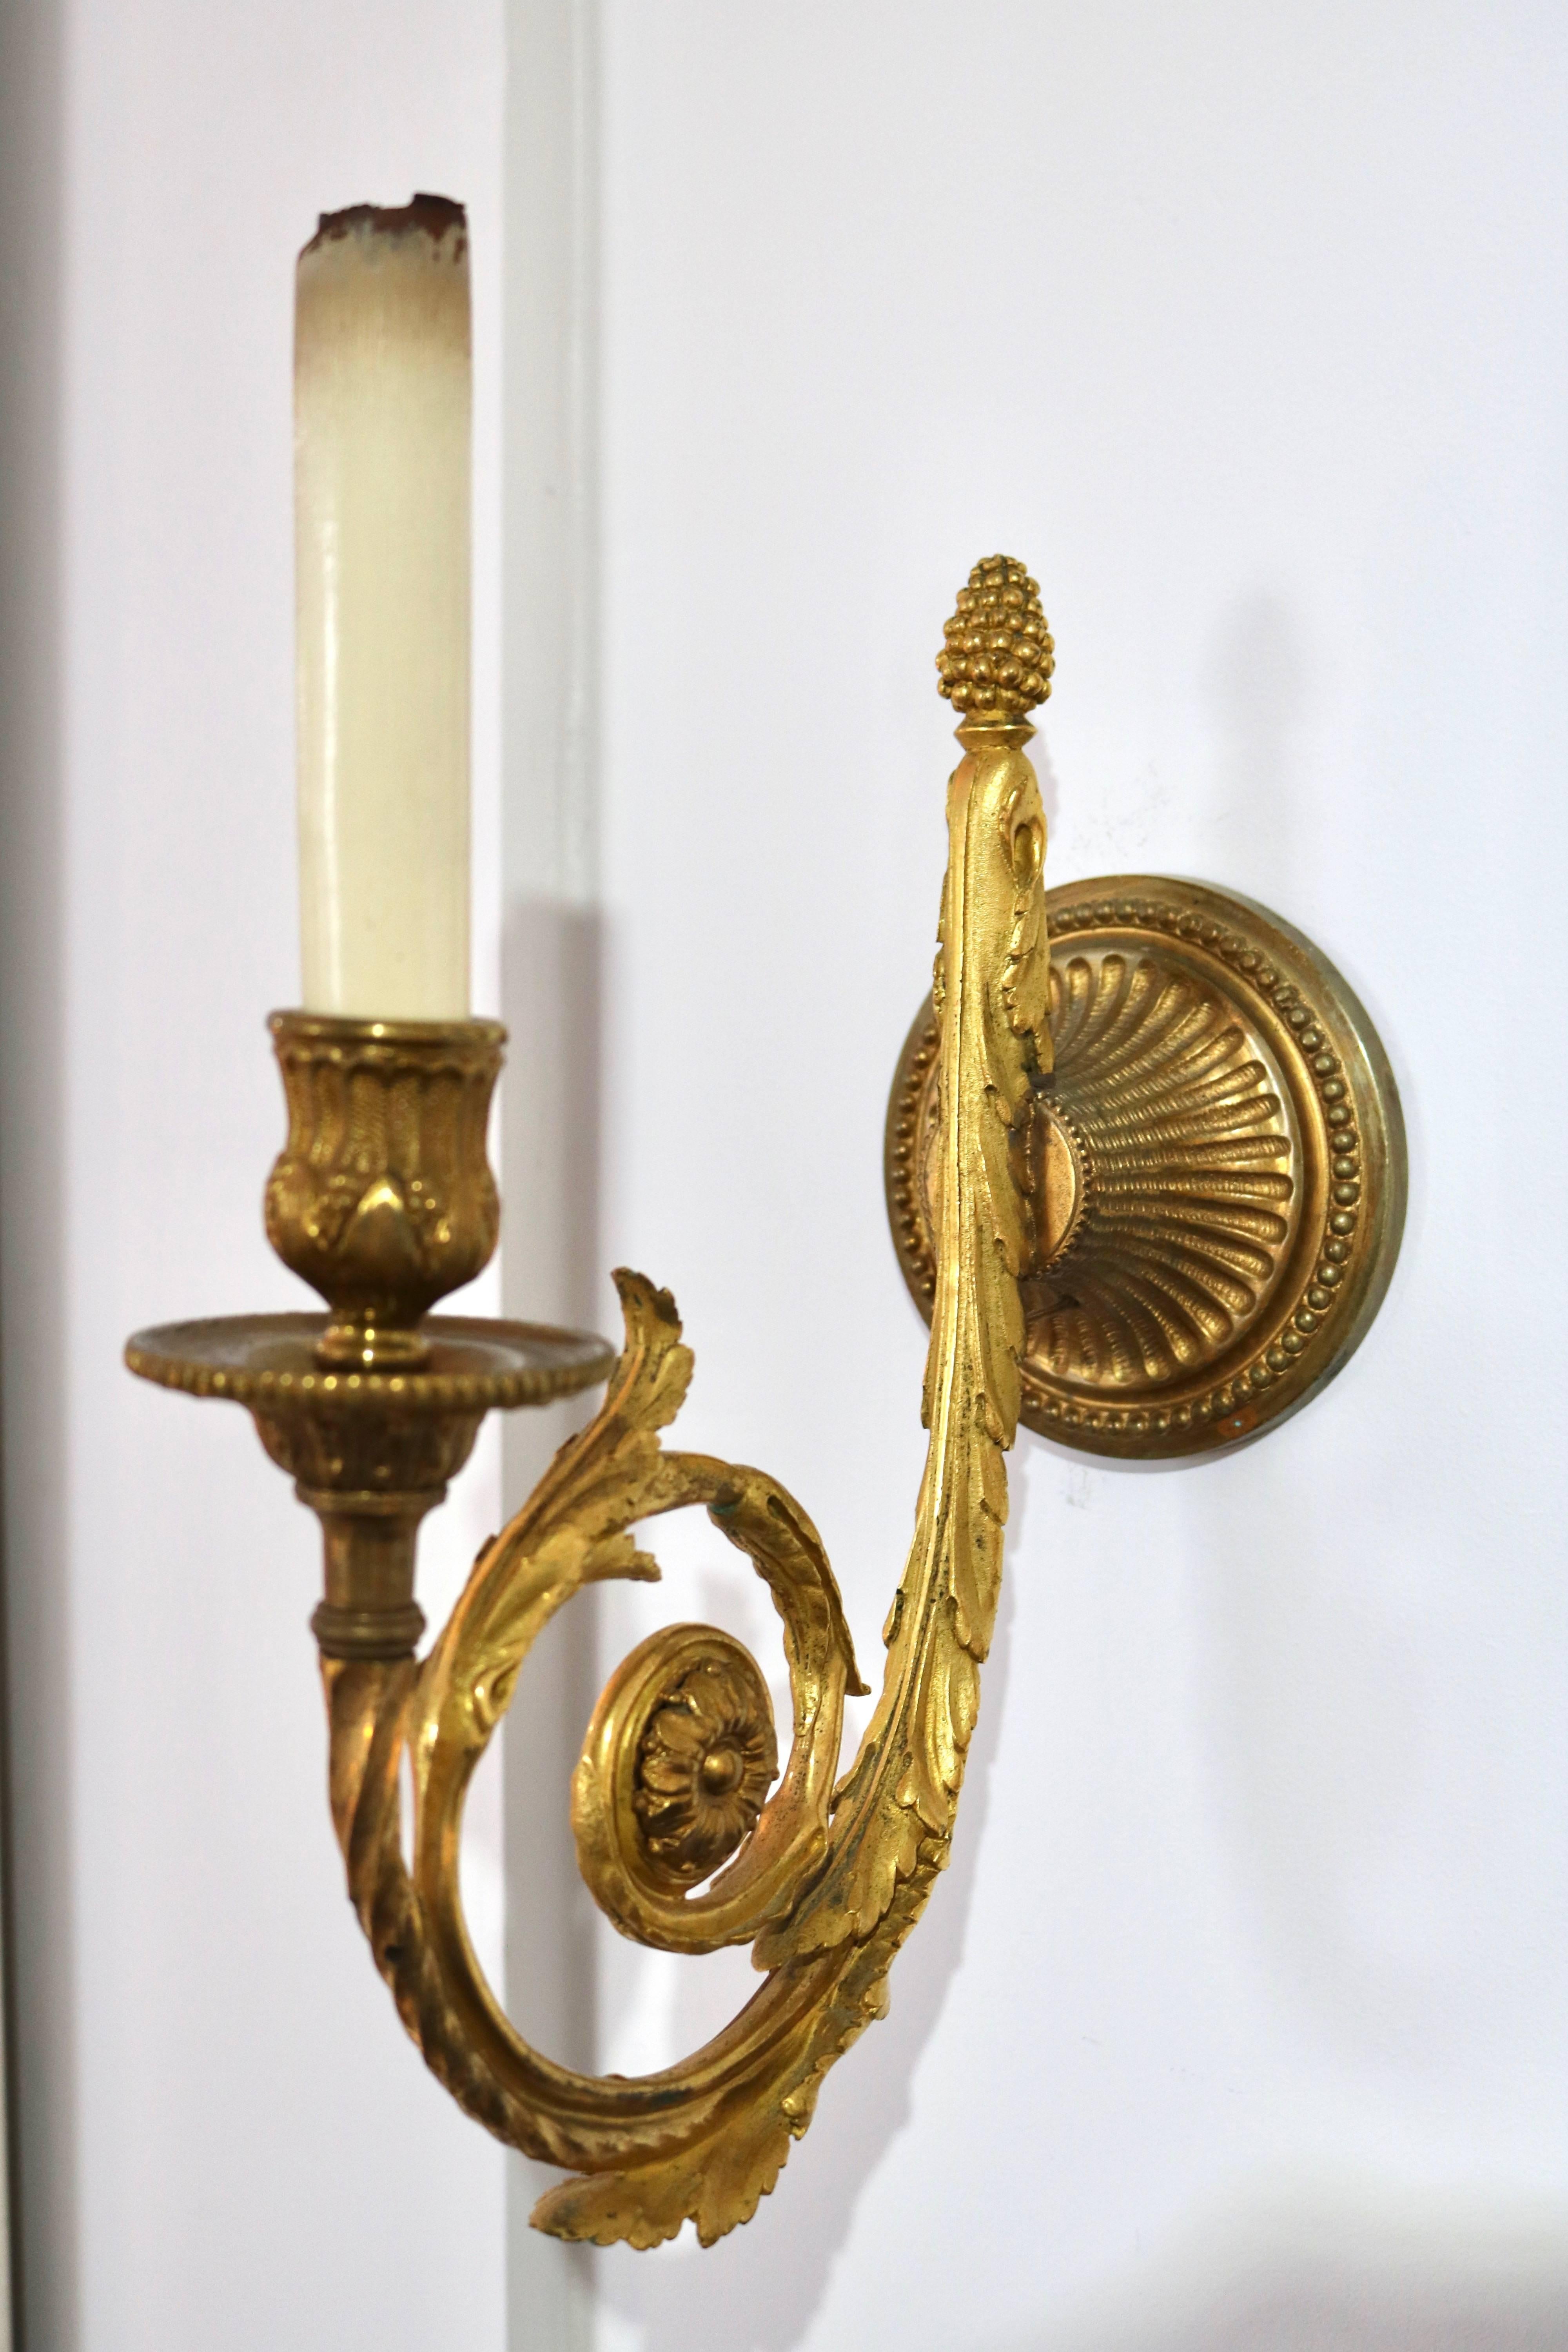 This stylish pair of wall sconces are in the Louis XVI taste and date from the late 19th century. The bronze doré is a combination of gilt gold and an antique gold coloration. They retain their original wood candle sleeves in an antique white